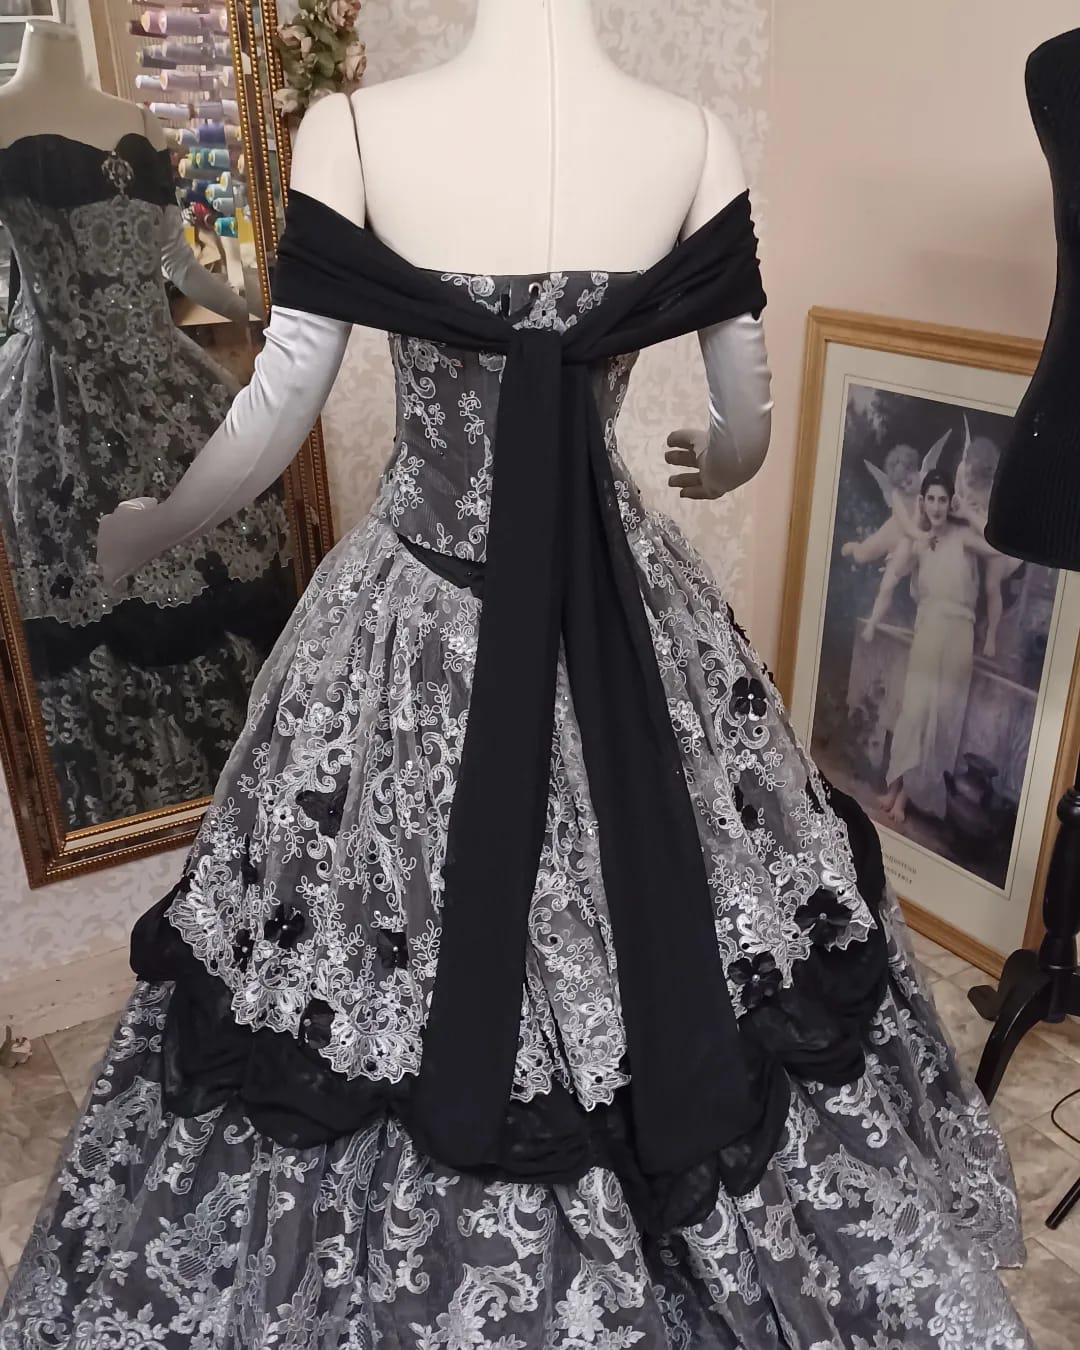 SOLD! Gothic Victorian Grey/Black gown with Flowers and Butterflies Medium/Large +veil tiara